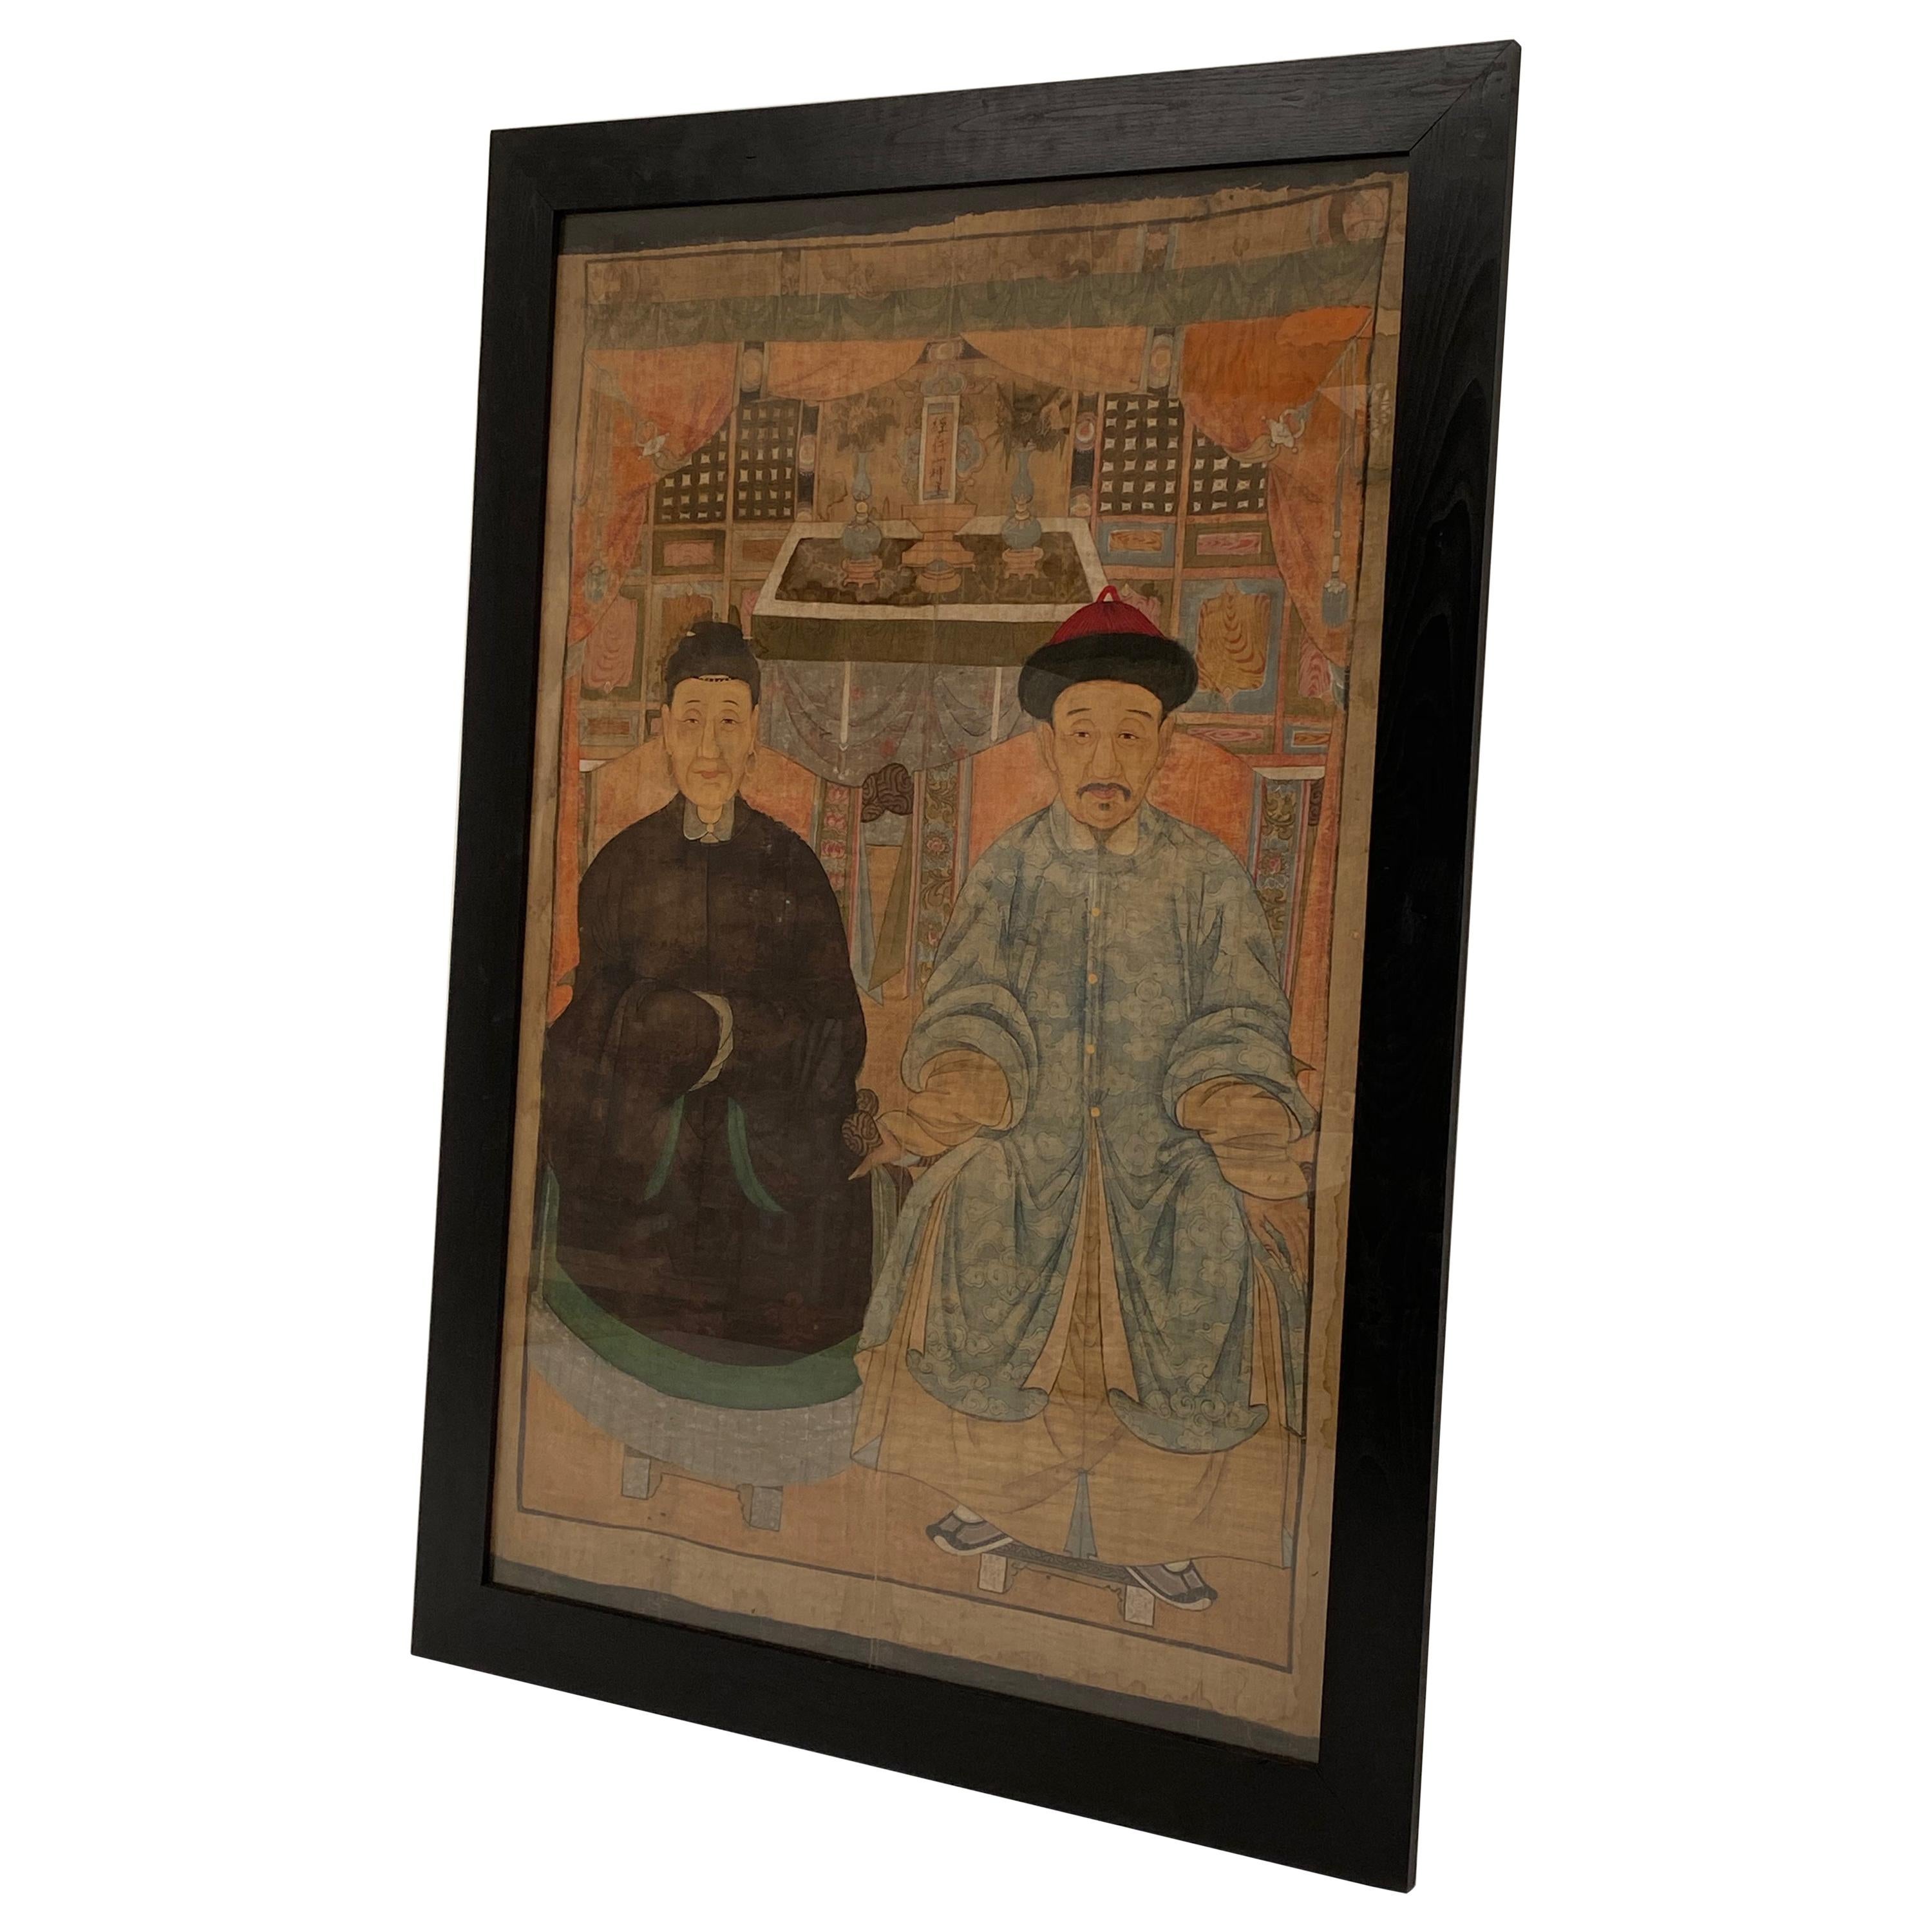 Chinese Ancestor Portrait For Sale